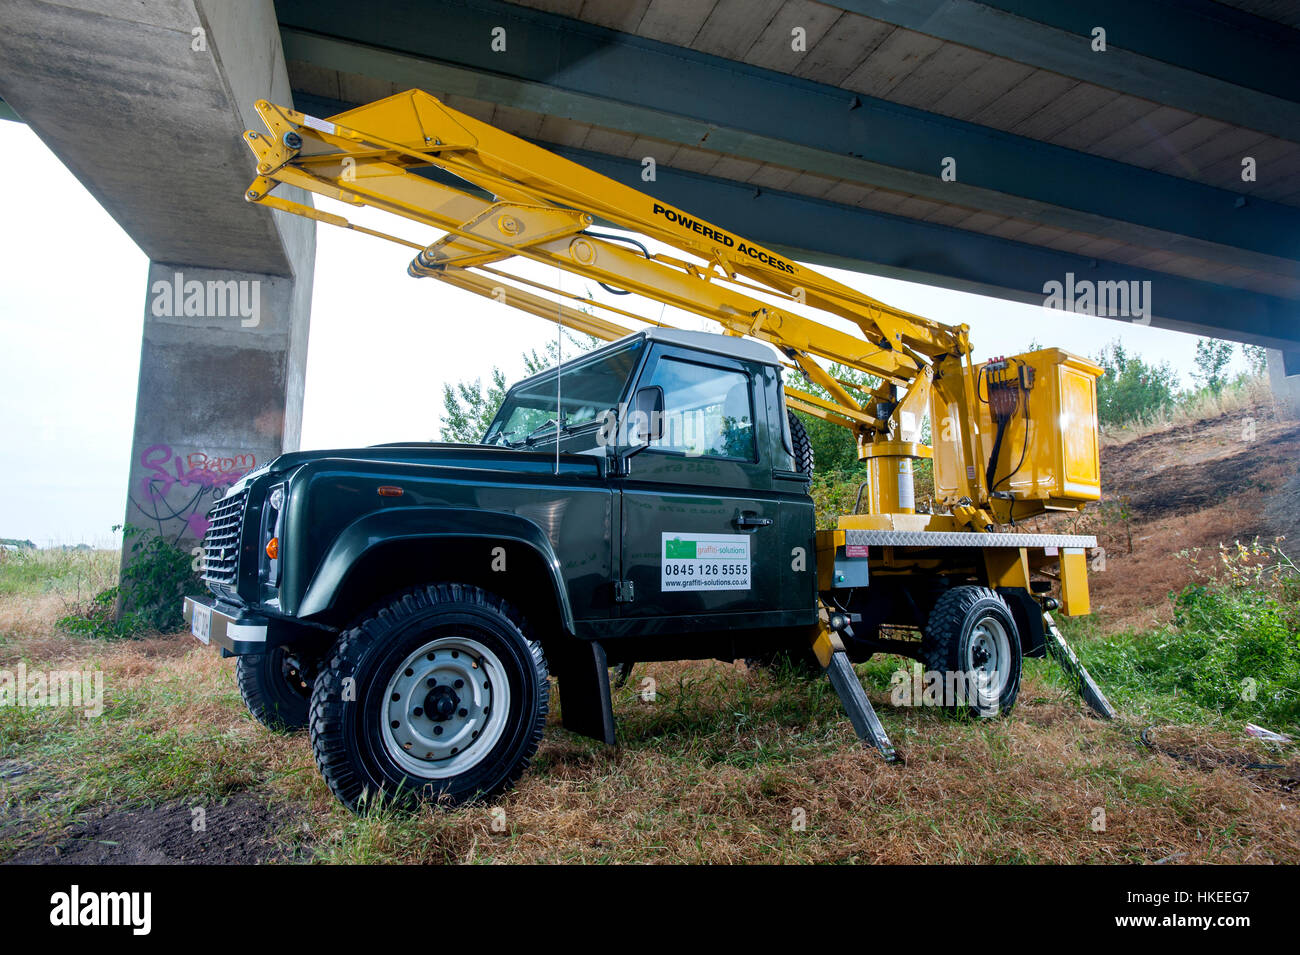 Working Land Rover Defender fitted with a high access lift cherry picker Stock Photo